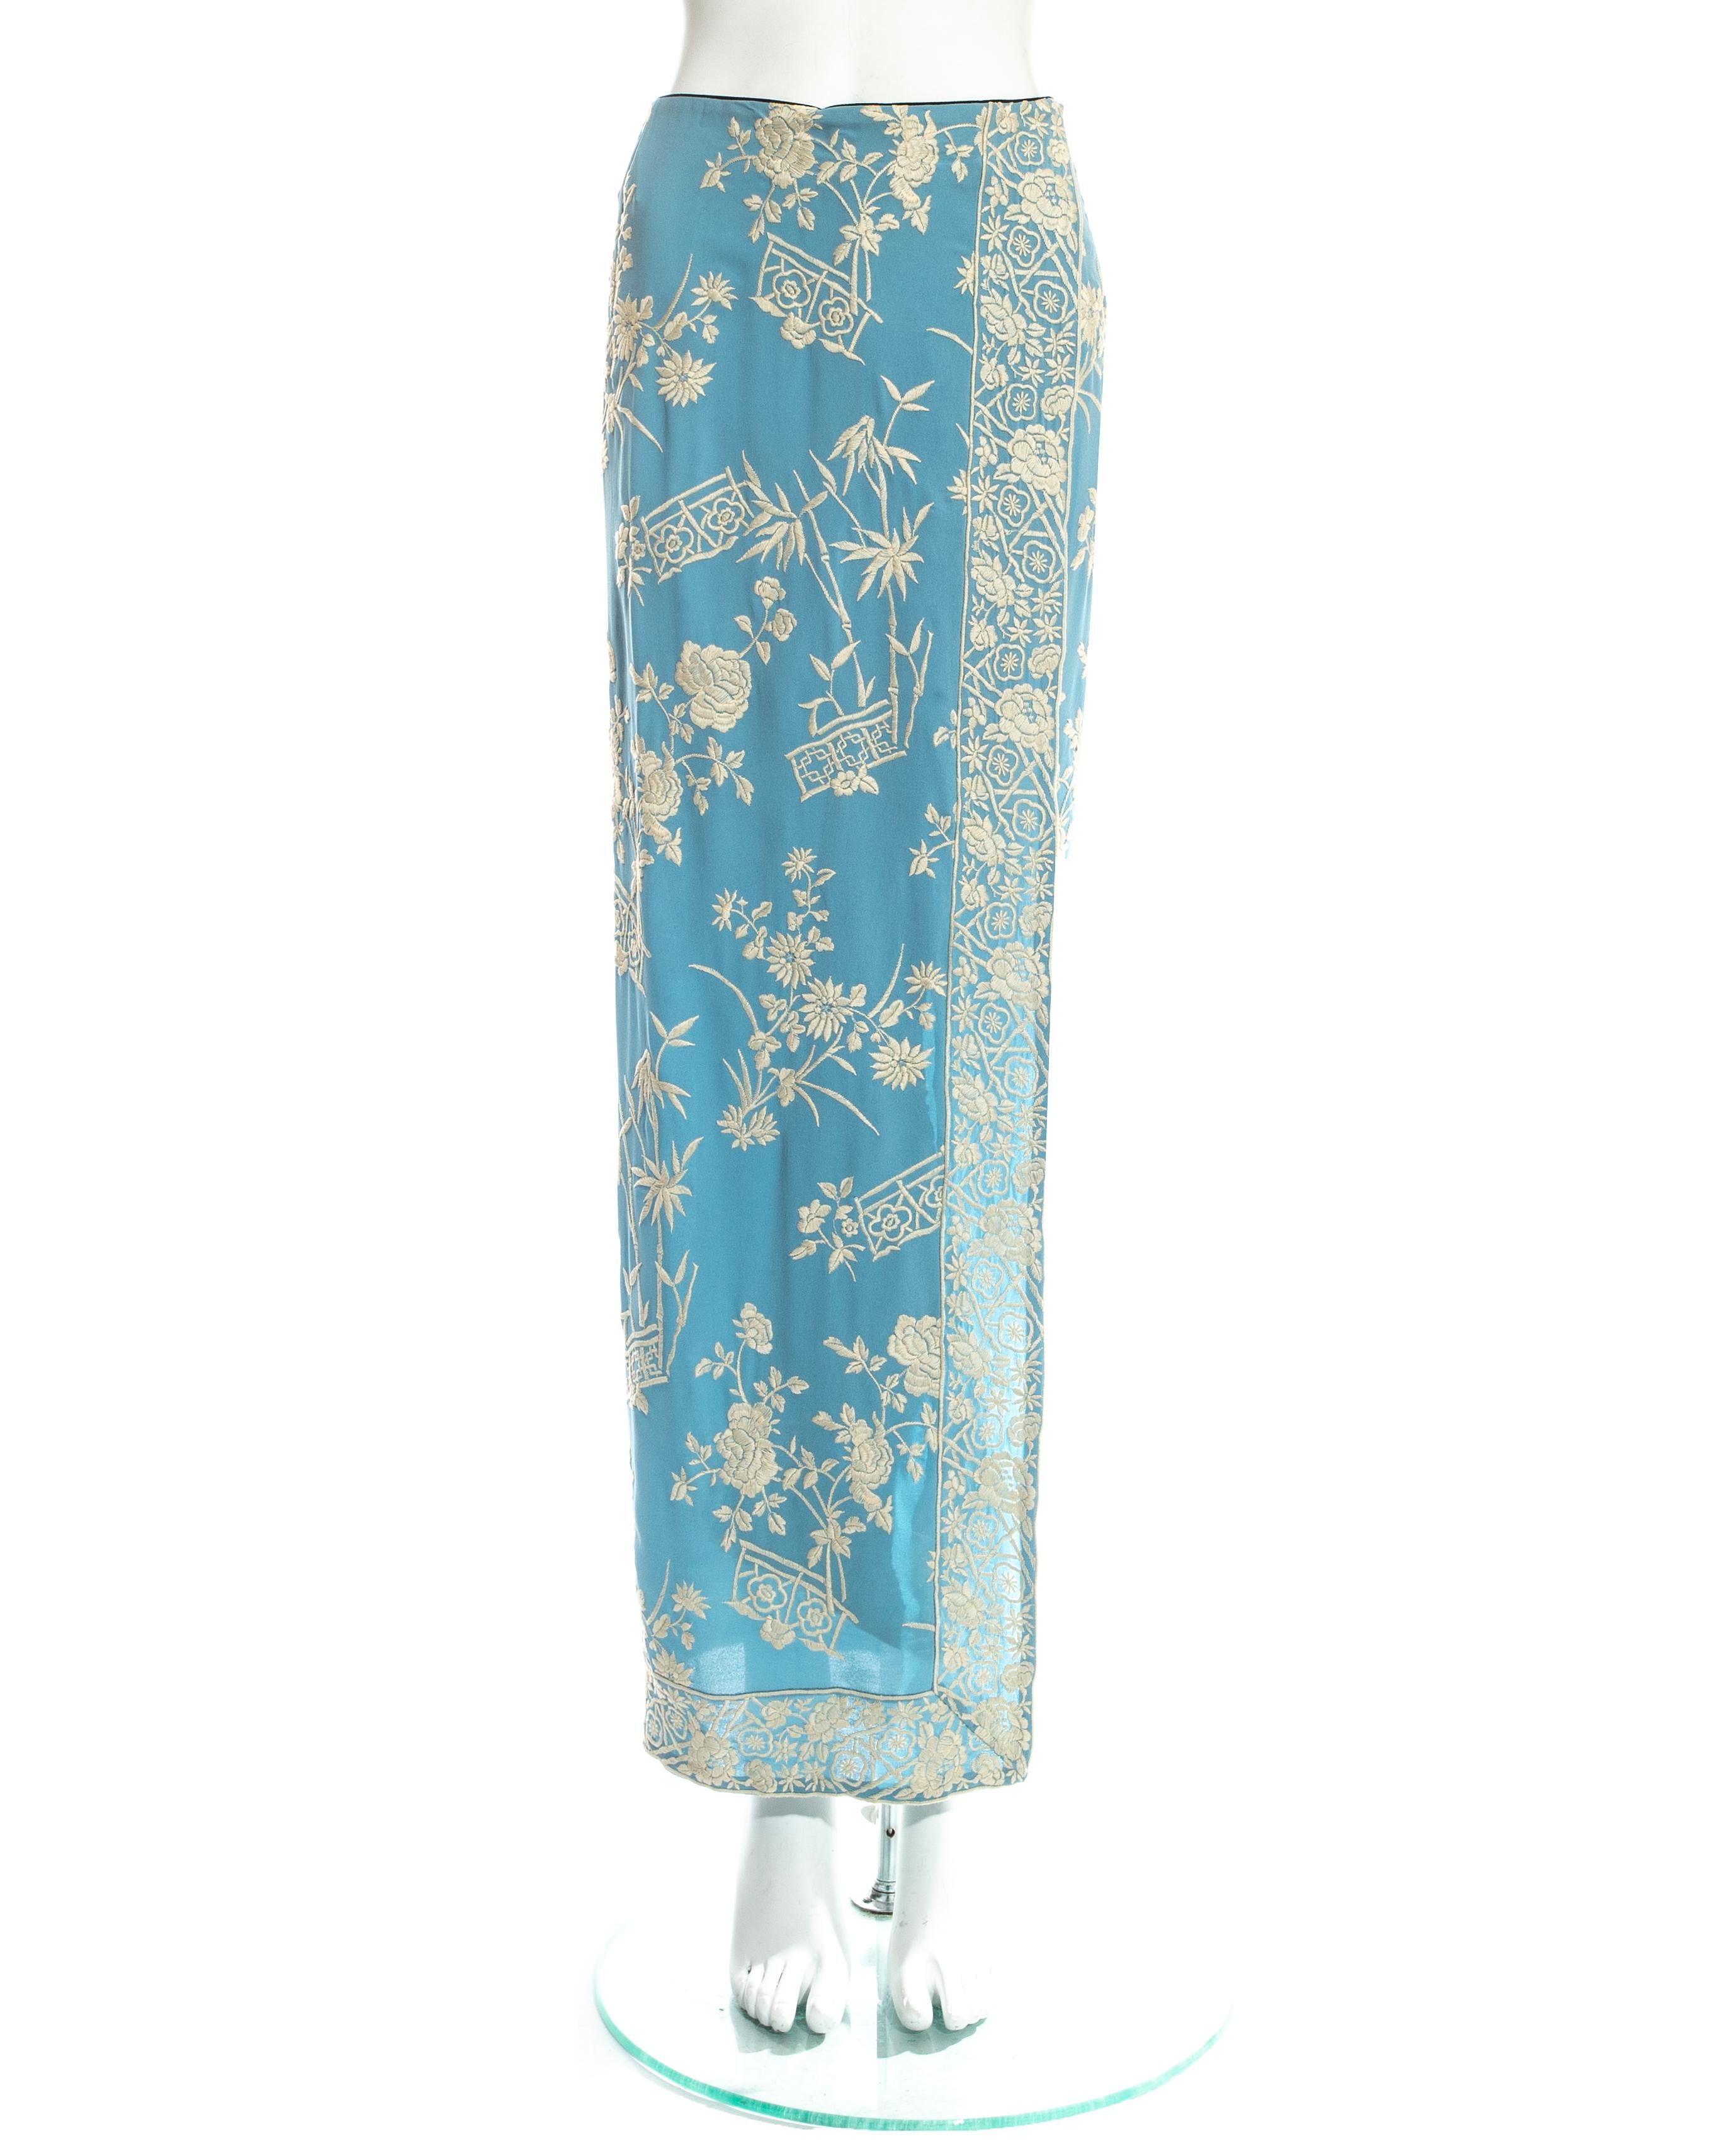 Dolce & Gabbana blue silk sarong style wrap skirt with white floral embroidery. 

Spring-Summer 1997